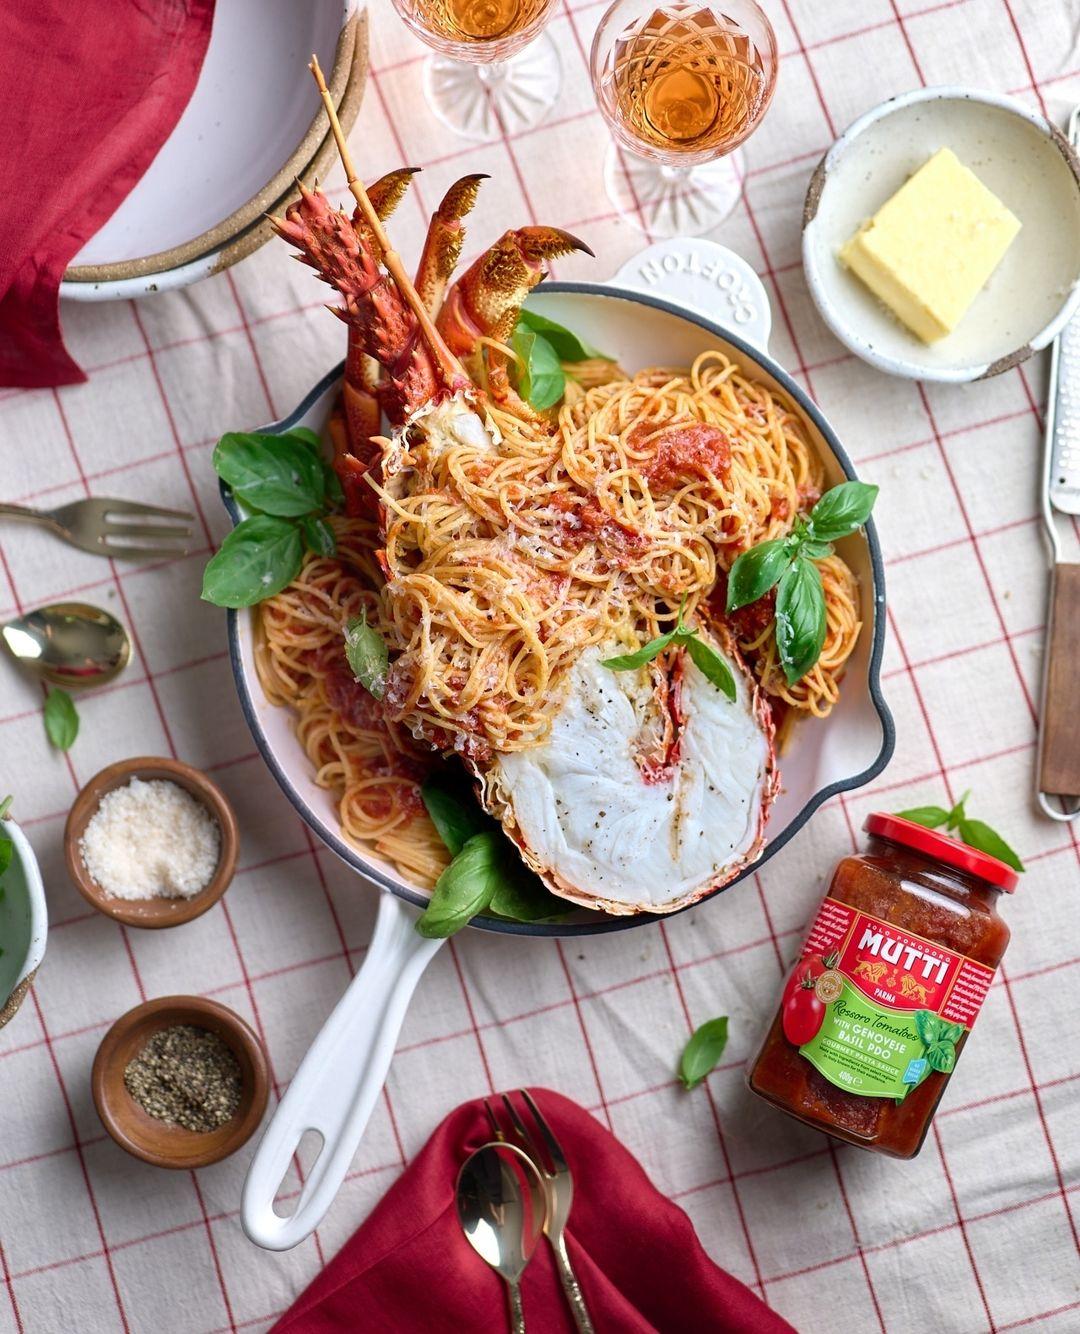 class="content__text"
 Don’t waste your money on a set menu at a fancy restaurant for Valentine’s Day when you can whip up this lobster spaghetti in no time with the help of a jar of @muttipomodoroau Gourmet Pasta Sauce Rossoro Tomatoes With Genovese Basil. You only need a few ingredients and you’ll have a romantic meal for 2 in no time! If lobster isn’t within your budget, you can easily swap for some prawns and it will still be a dish to remember. ⁠
⁠
1/2 cooked lobster in shell⁠
2 tbsp extra virgin olive oil⁠
Salt and pepper⁠
200g spaghetti⁠
200g MUTTI Gourmet Pasta Sauce Rossoro Tomatoes With Genovese Basil⁠
125ml cup white wine⁠
Basil leaves, to serve⁠
Parmesan, grated to serve⁠
⁠
Preheat the grill to high.⁠
⁠
Lightly coat the meaty side of the lobster with 1 tablespoon of olive oil and season with salt and pepper. Place under the grill, meaty side up and do not flip over. Grill until thoroughly heated through, remove and set aside. ⁠
⁠
Meanwhile, place the spaghetti in a large saucepan of boiling salted water and cook to 1 minute under the packet instructions. Drain and reserve some of the pasta water. ⁠
⁠
Heat the remaining 1 tablespoon of oil in a frying pan, add the MUTTI sauce and white wine until heated through. Using tongs, add the pasta and a little pasta water and cook until pasta is cooked. ⁠
⁠
Serve the pasta with the lobster, basil leaves and grated parmesan. ⁠
⁠
 #sponsored #ad 
 